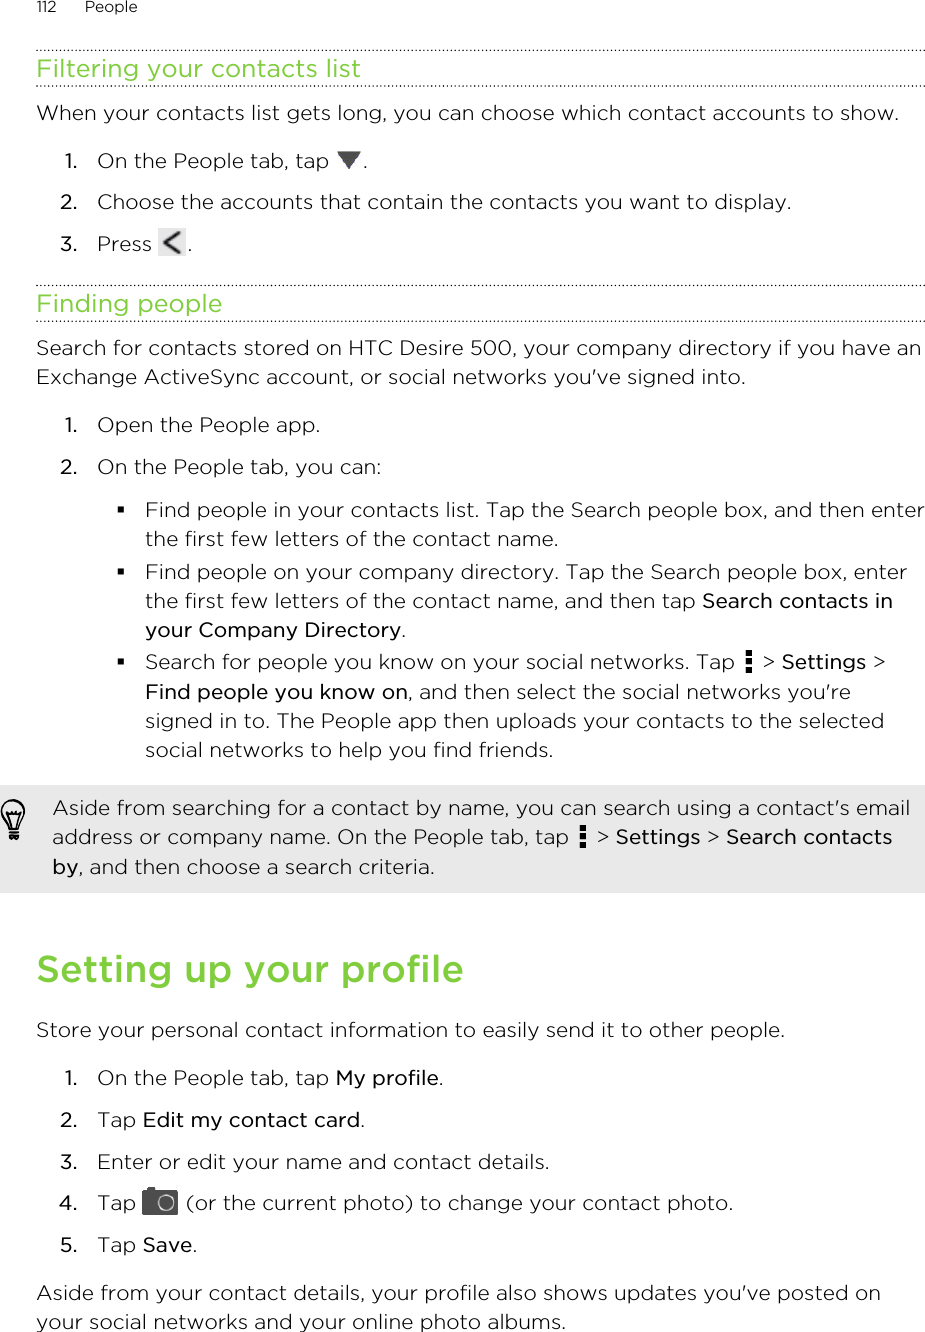 Filtering your contacts listWhen your contacts list gets long, you can choose which contact accounts to show.1. On the People tab, tap  .2. Choose the accounts that contain the contacts you want to display.3. Press  .Finding peopleSearch for contacts stored on HTC Desire 500, your company directory if you have anExchange ActiveSync account, or social networks you&apos;ve signed into.1. Open the People app.2. On the People tab, you can:§Find people in your contacts list. Tap the Search people box, and then enterthe first few letters of the contact name.§Find people on your company directory. Tap the Search people box, enterthe first few letters of the contact name, and then tap Search contacts inyour Company Directory.§Search for people you know on your social networks. Tap   &gt; Settings &gt;Find people you know on, and then select the social networks you&apos;resigned in to. The People app then uploads your contacts to the selectedsocial networks to help you find friends.Aside from searching for a contact by name, you can search using a contact&apos;s emailaddress or company name. On the People tab, tap   &gt; Settings &gt; Search contactsby, and then choose a search criteria.Setting up your profileStore your personal contact information to easily send it to other people.1. On the People tab, tap My profile.2. Tap Edit my contact card.3. Enter or edit your name and contact details.4. Tap   (or the current photo) to change your contact photo.5. Tap Save.Aside from your contact details, your profile also shows updates you&apos;ve posted onyour social networks and your online photo albums.112 People